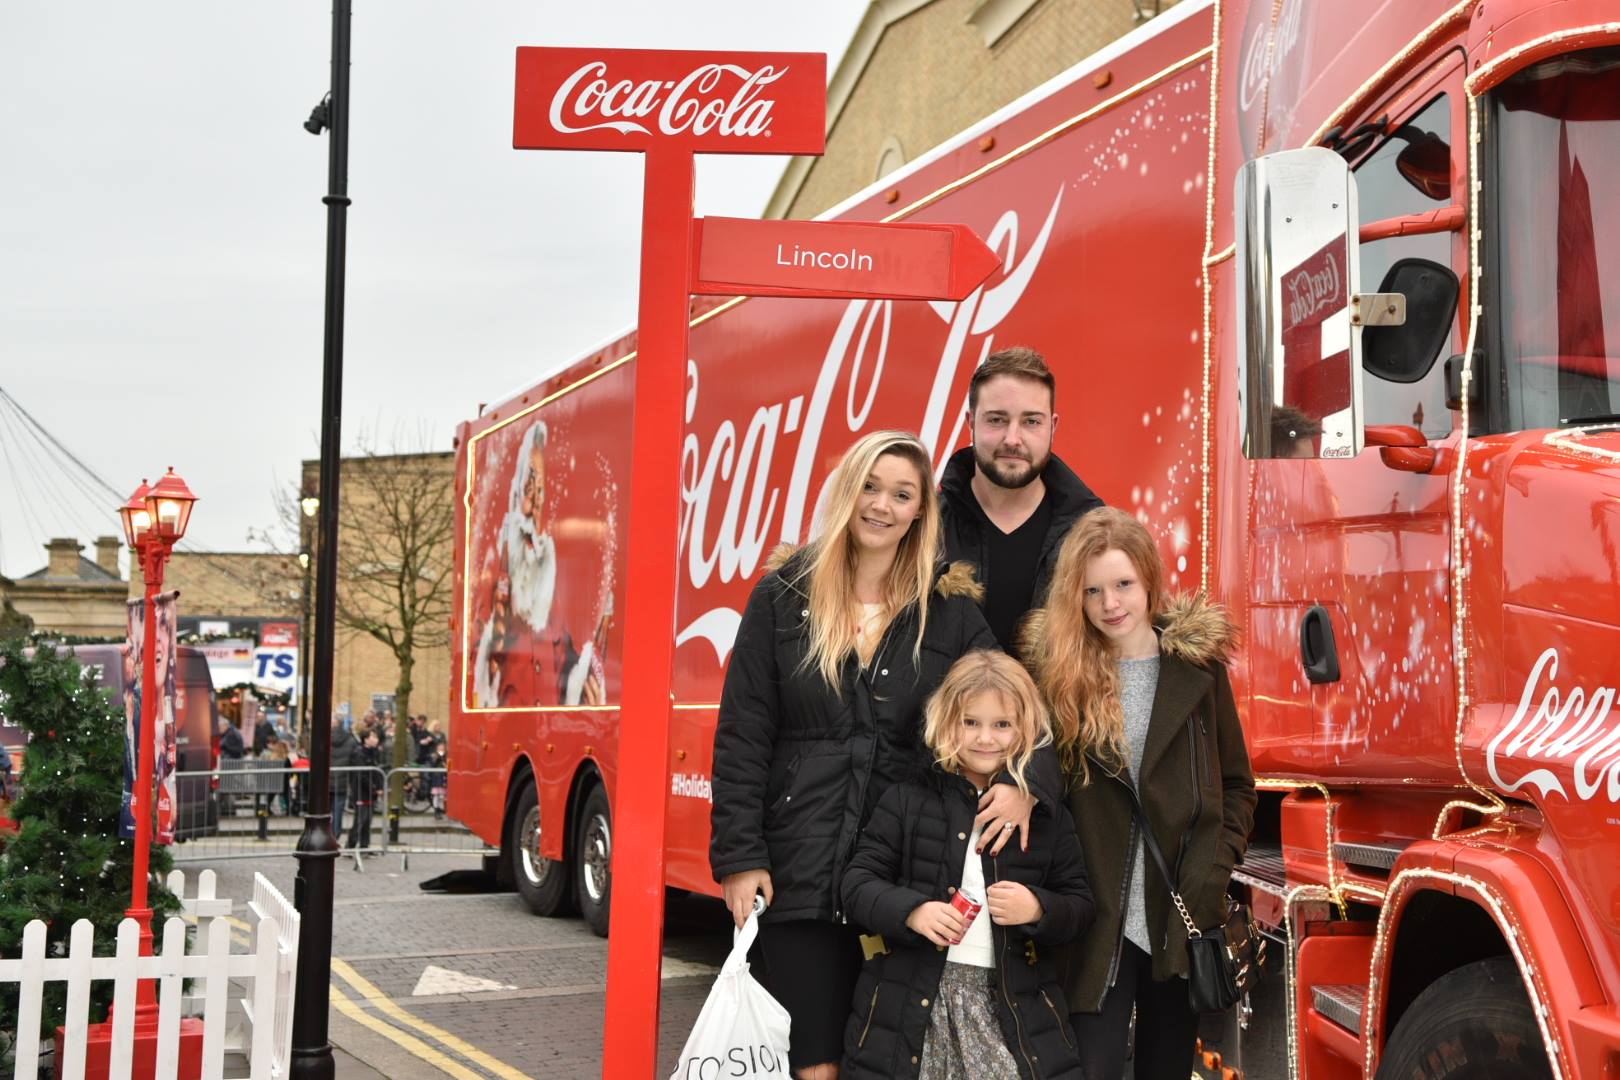 You can have your photo taken with the Coca Cola Christmas truck in Lincoln. Photo: Steve Smailes for The Lincolnite